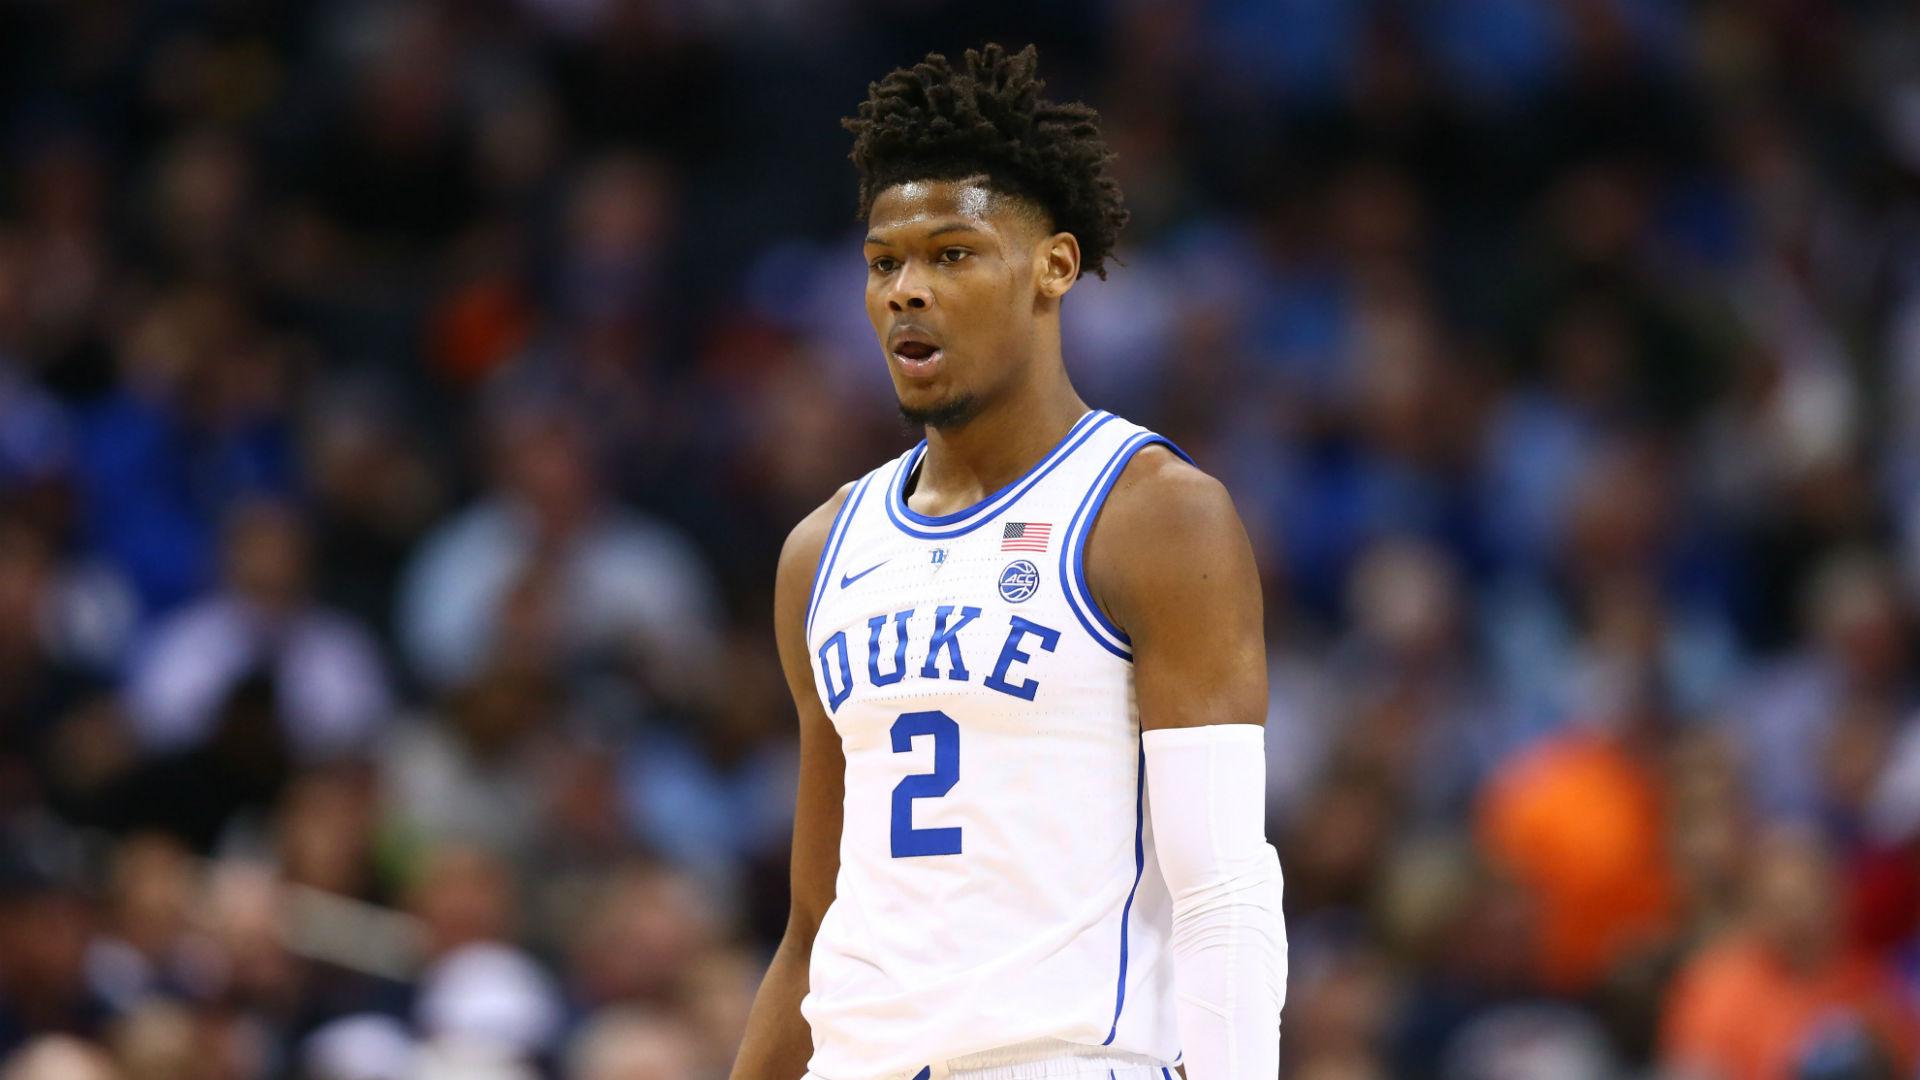 NBA Draft: Uncertainty bred by performance and injuries